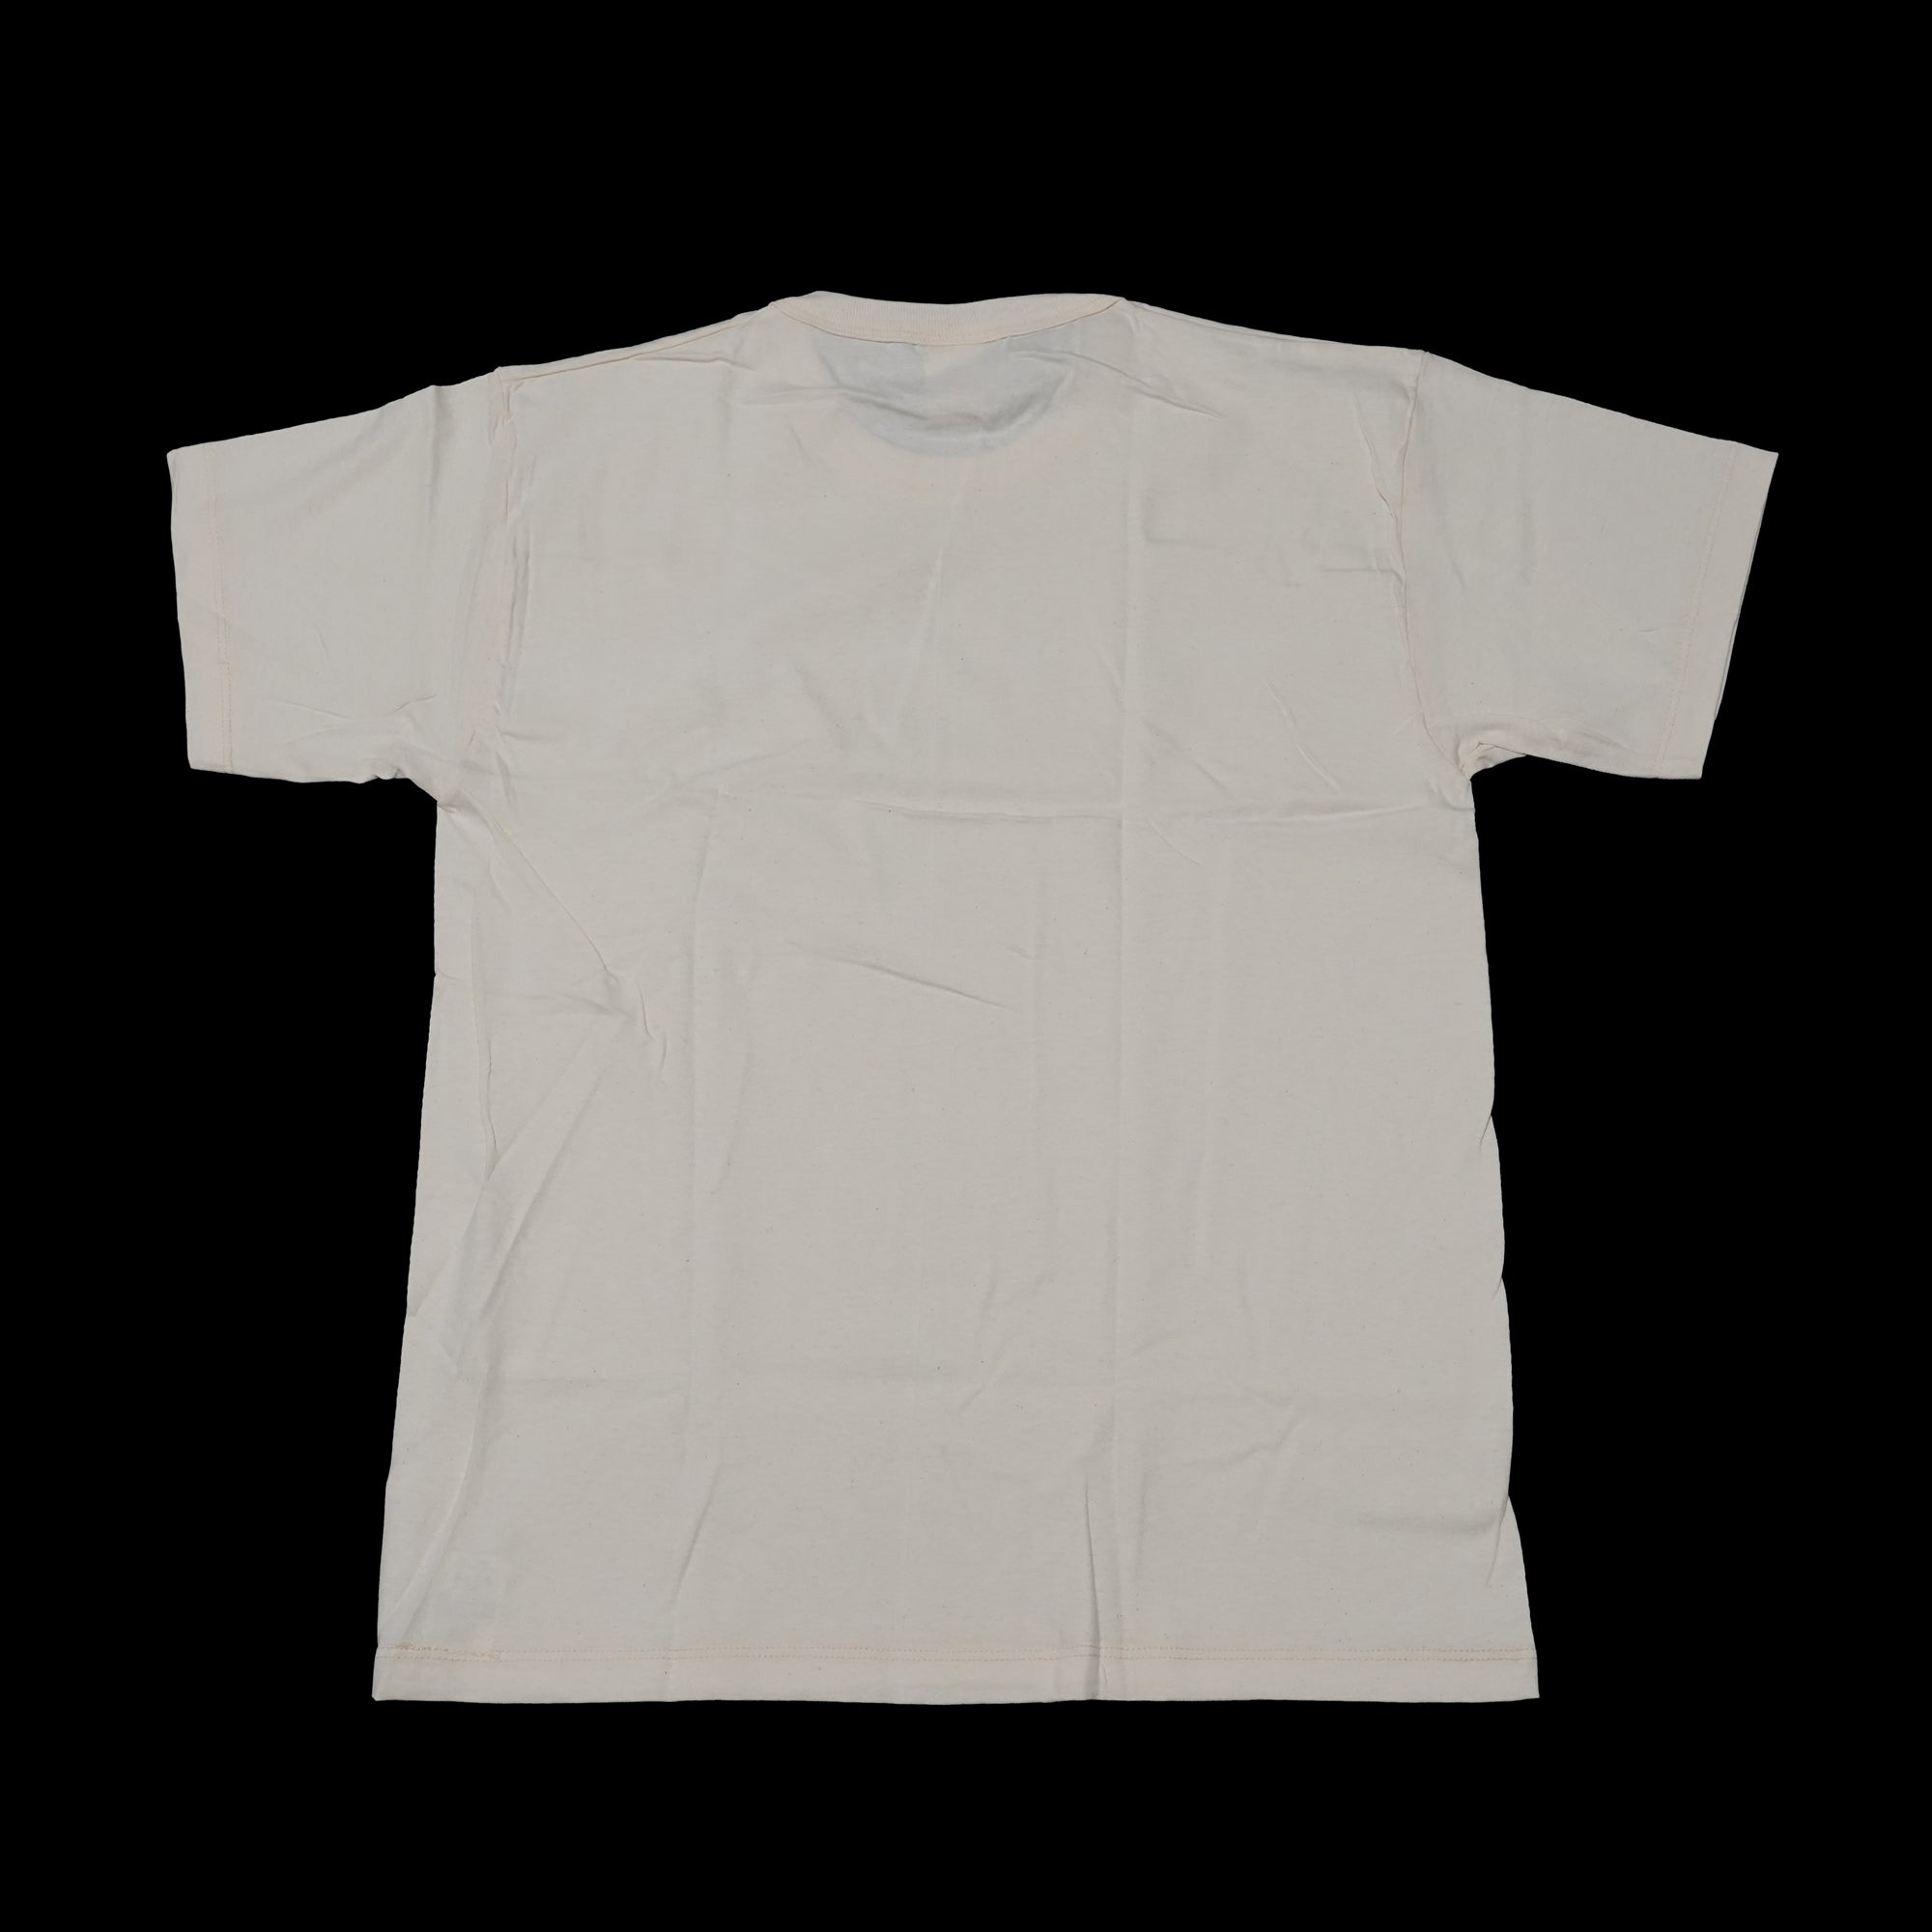 No:ST-1000 | Name: S/S CREW TEE | Color:Natural | Size:M/L 【Save Our Soil】-SAVE OUR SOIL-ADDICTION FUKUOKA